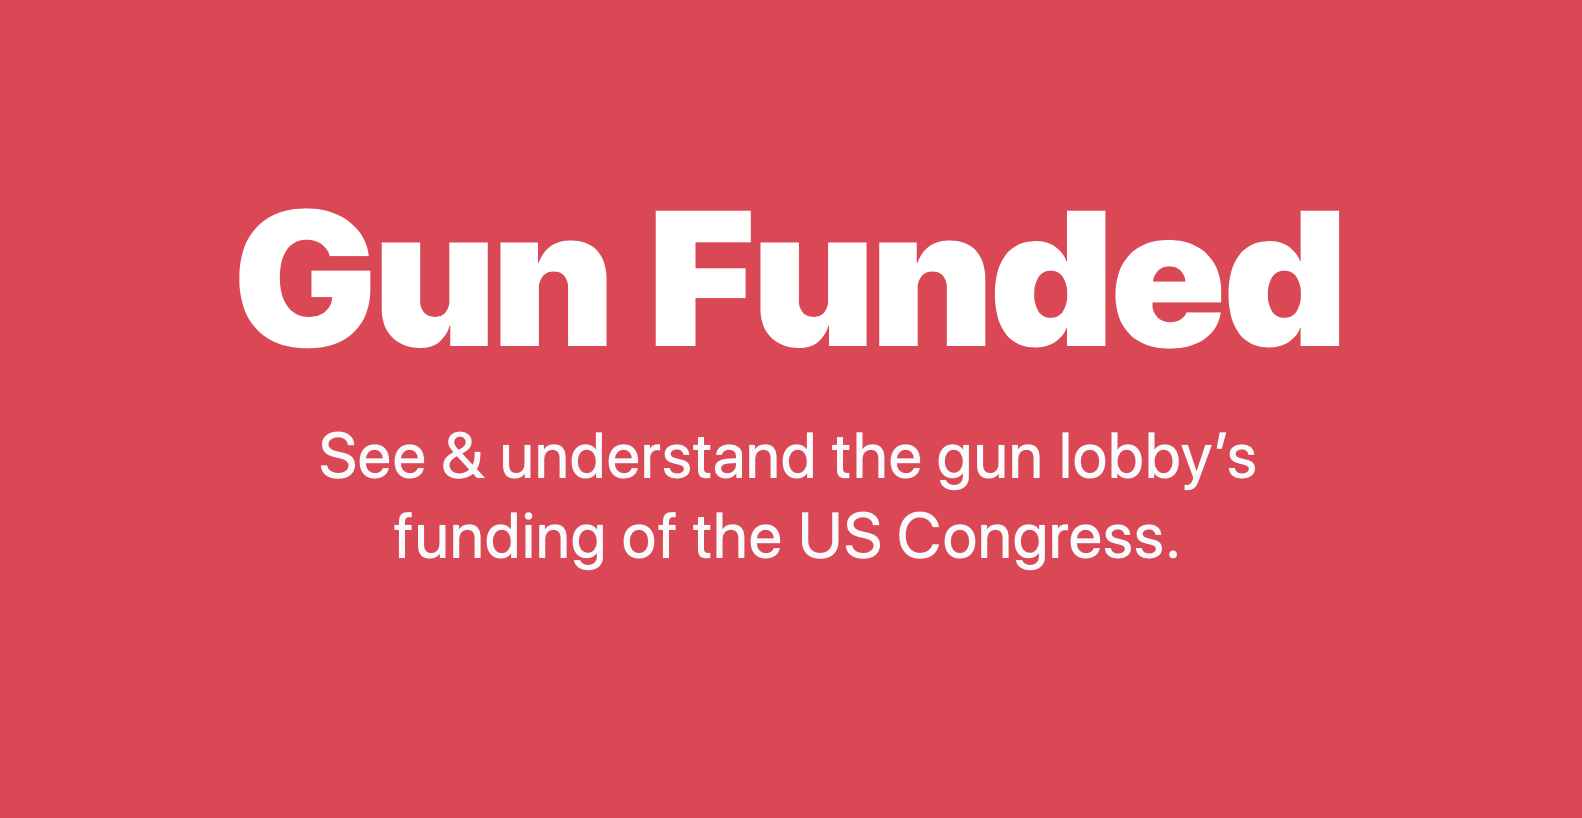 See & understand the gun lobby's funding of the US Congress.